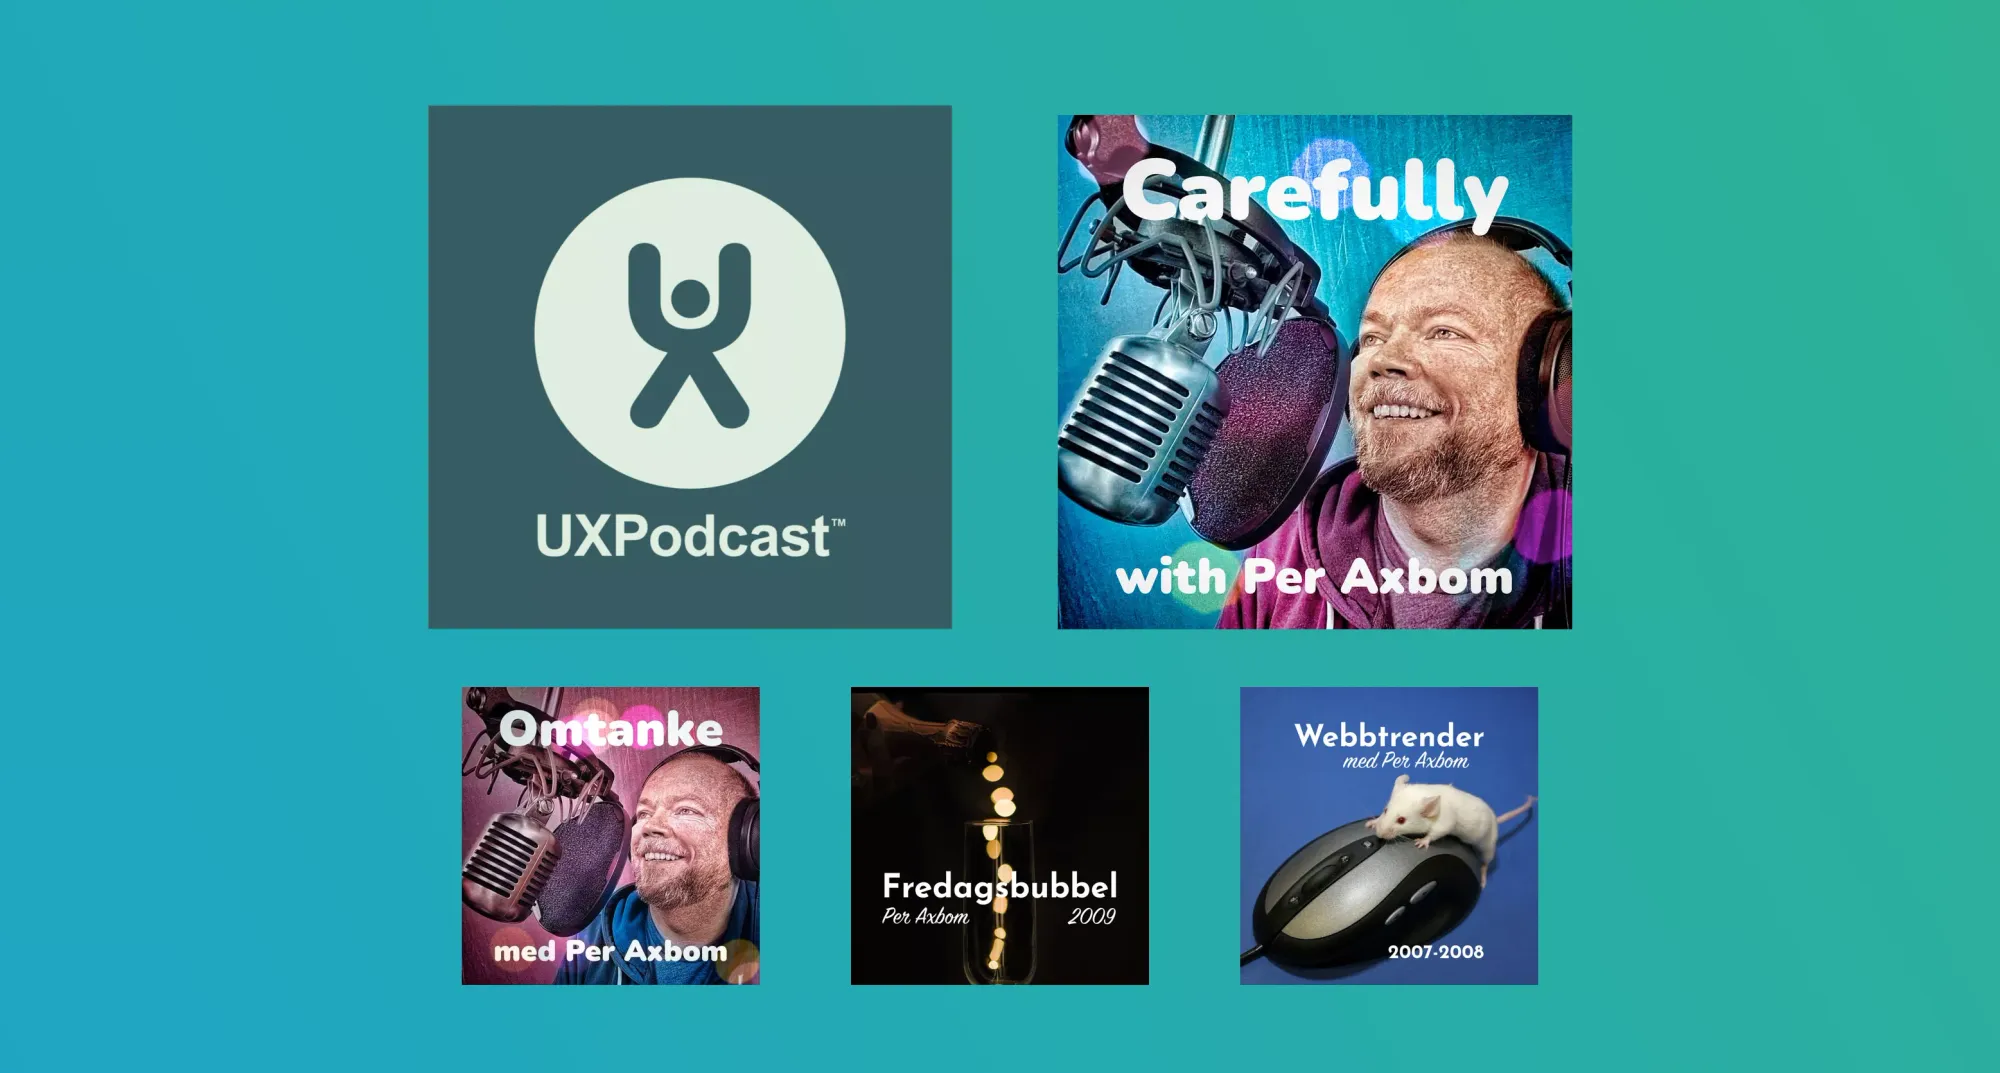 Covers for five different podcasts hosted by Per Axbom